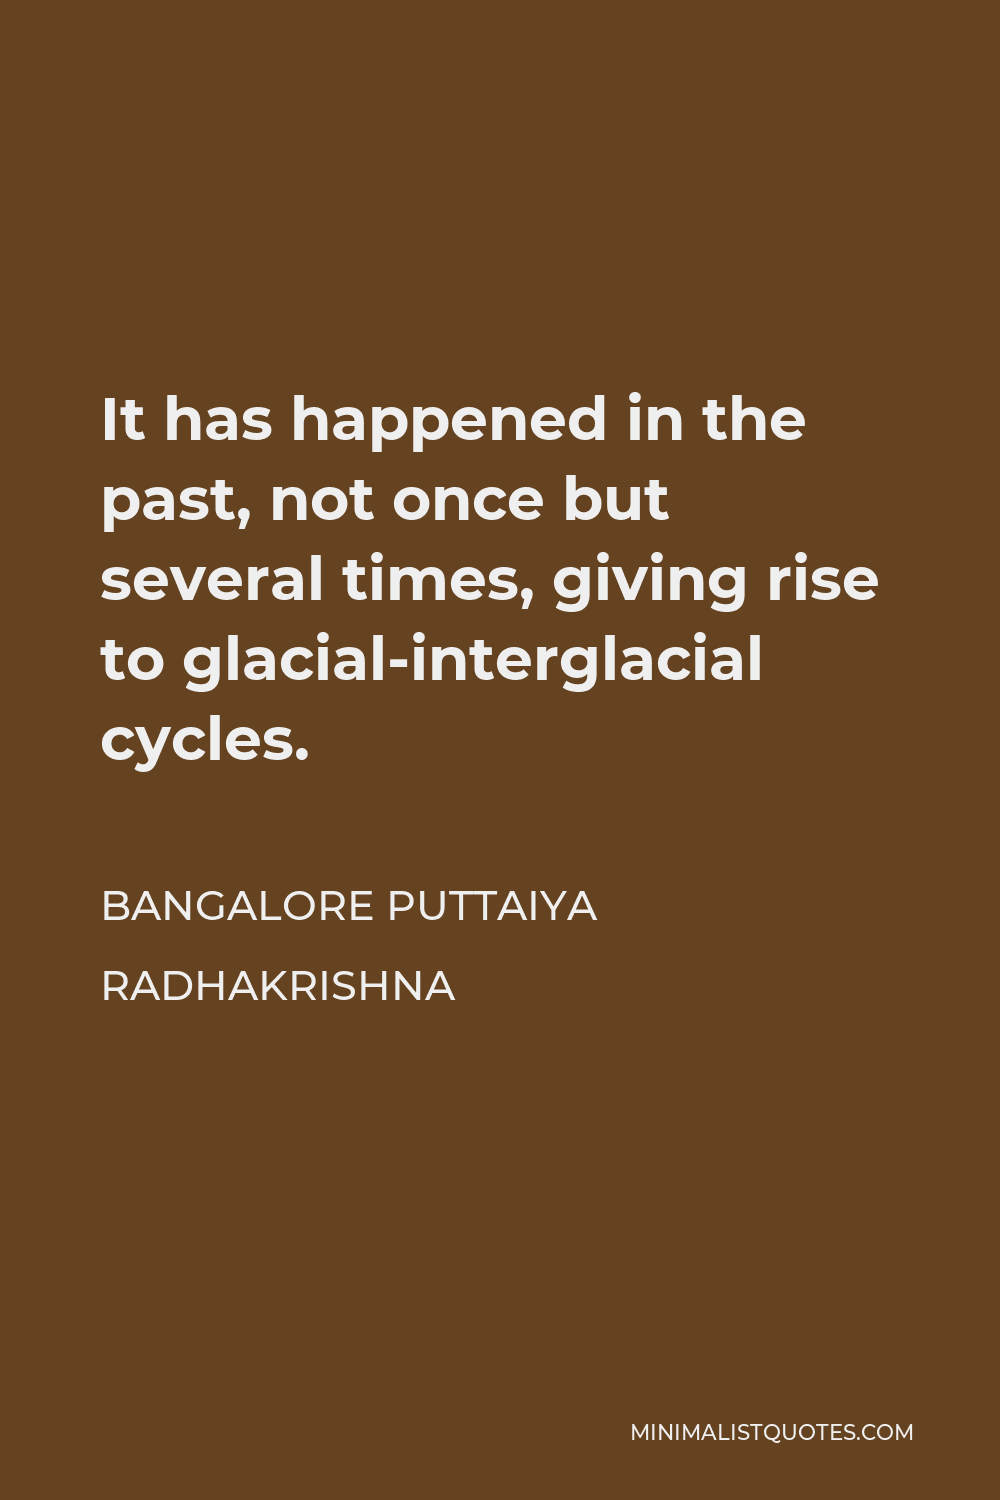 Bangalore Puttaiya Radhakrishna Quote - It has happened in the past, not once but several times, giving rise to glacial-interglacial cycles.